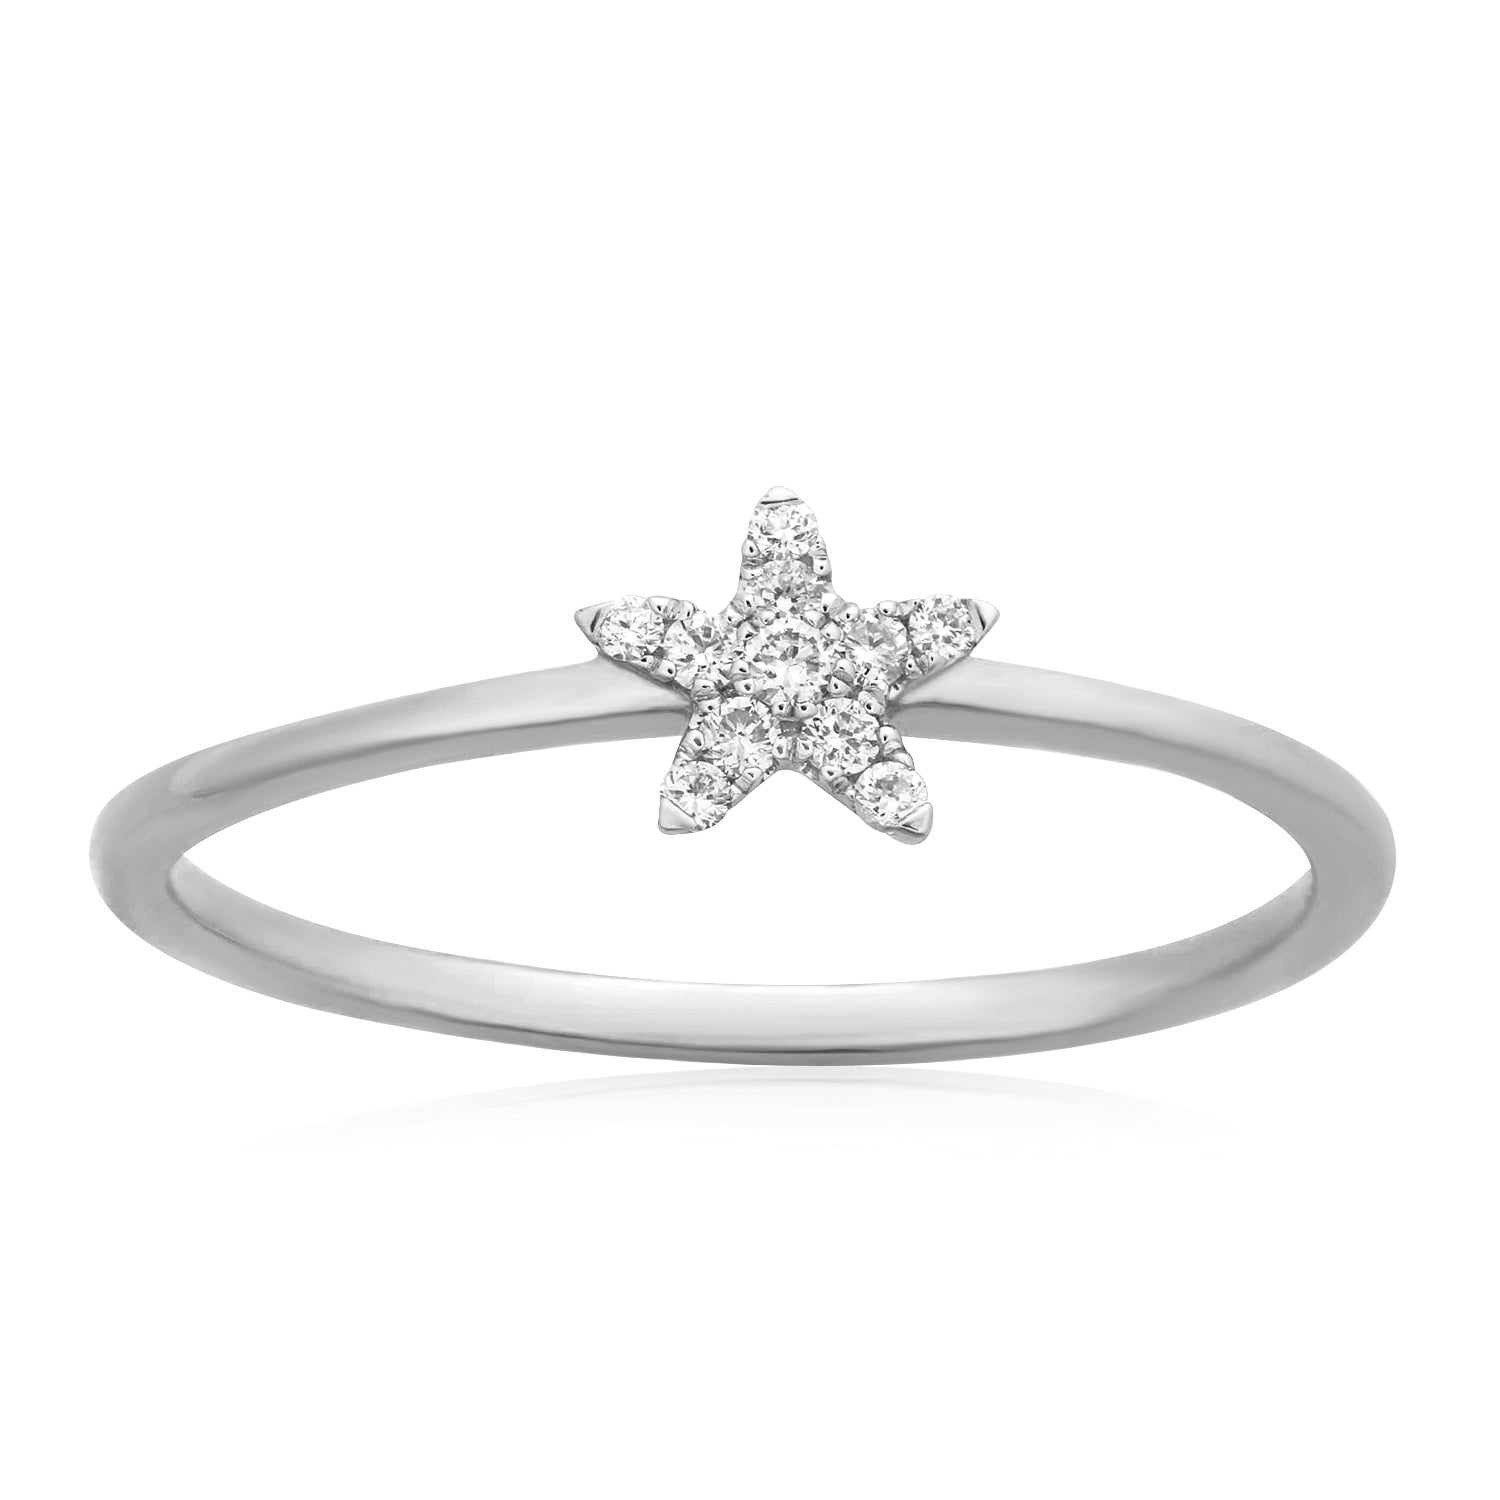 Star Ring With 0.07 Carat TW Of Diamonds In 10K White Gold